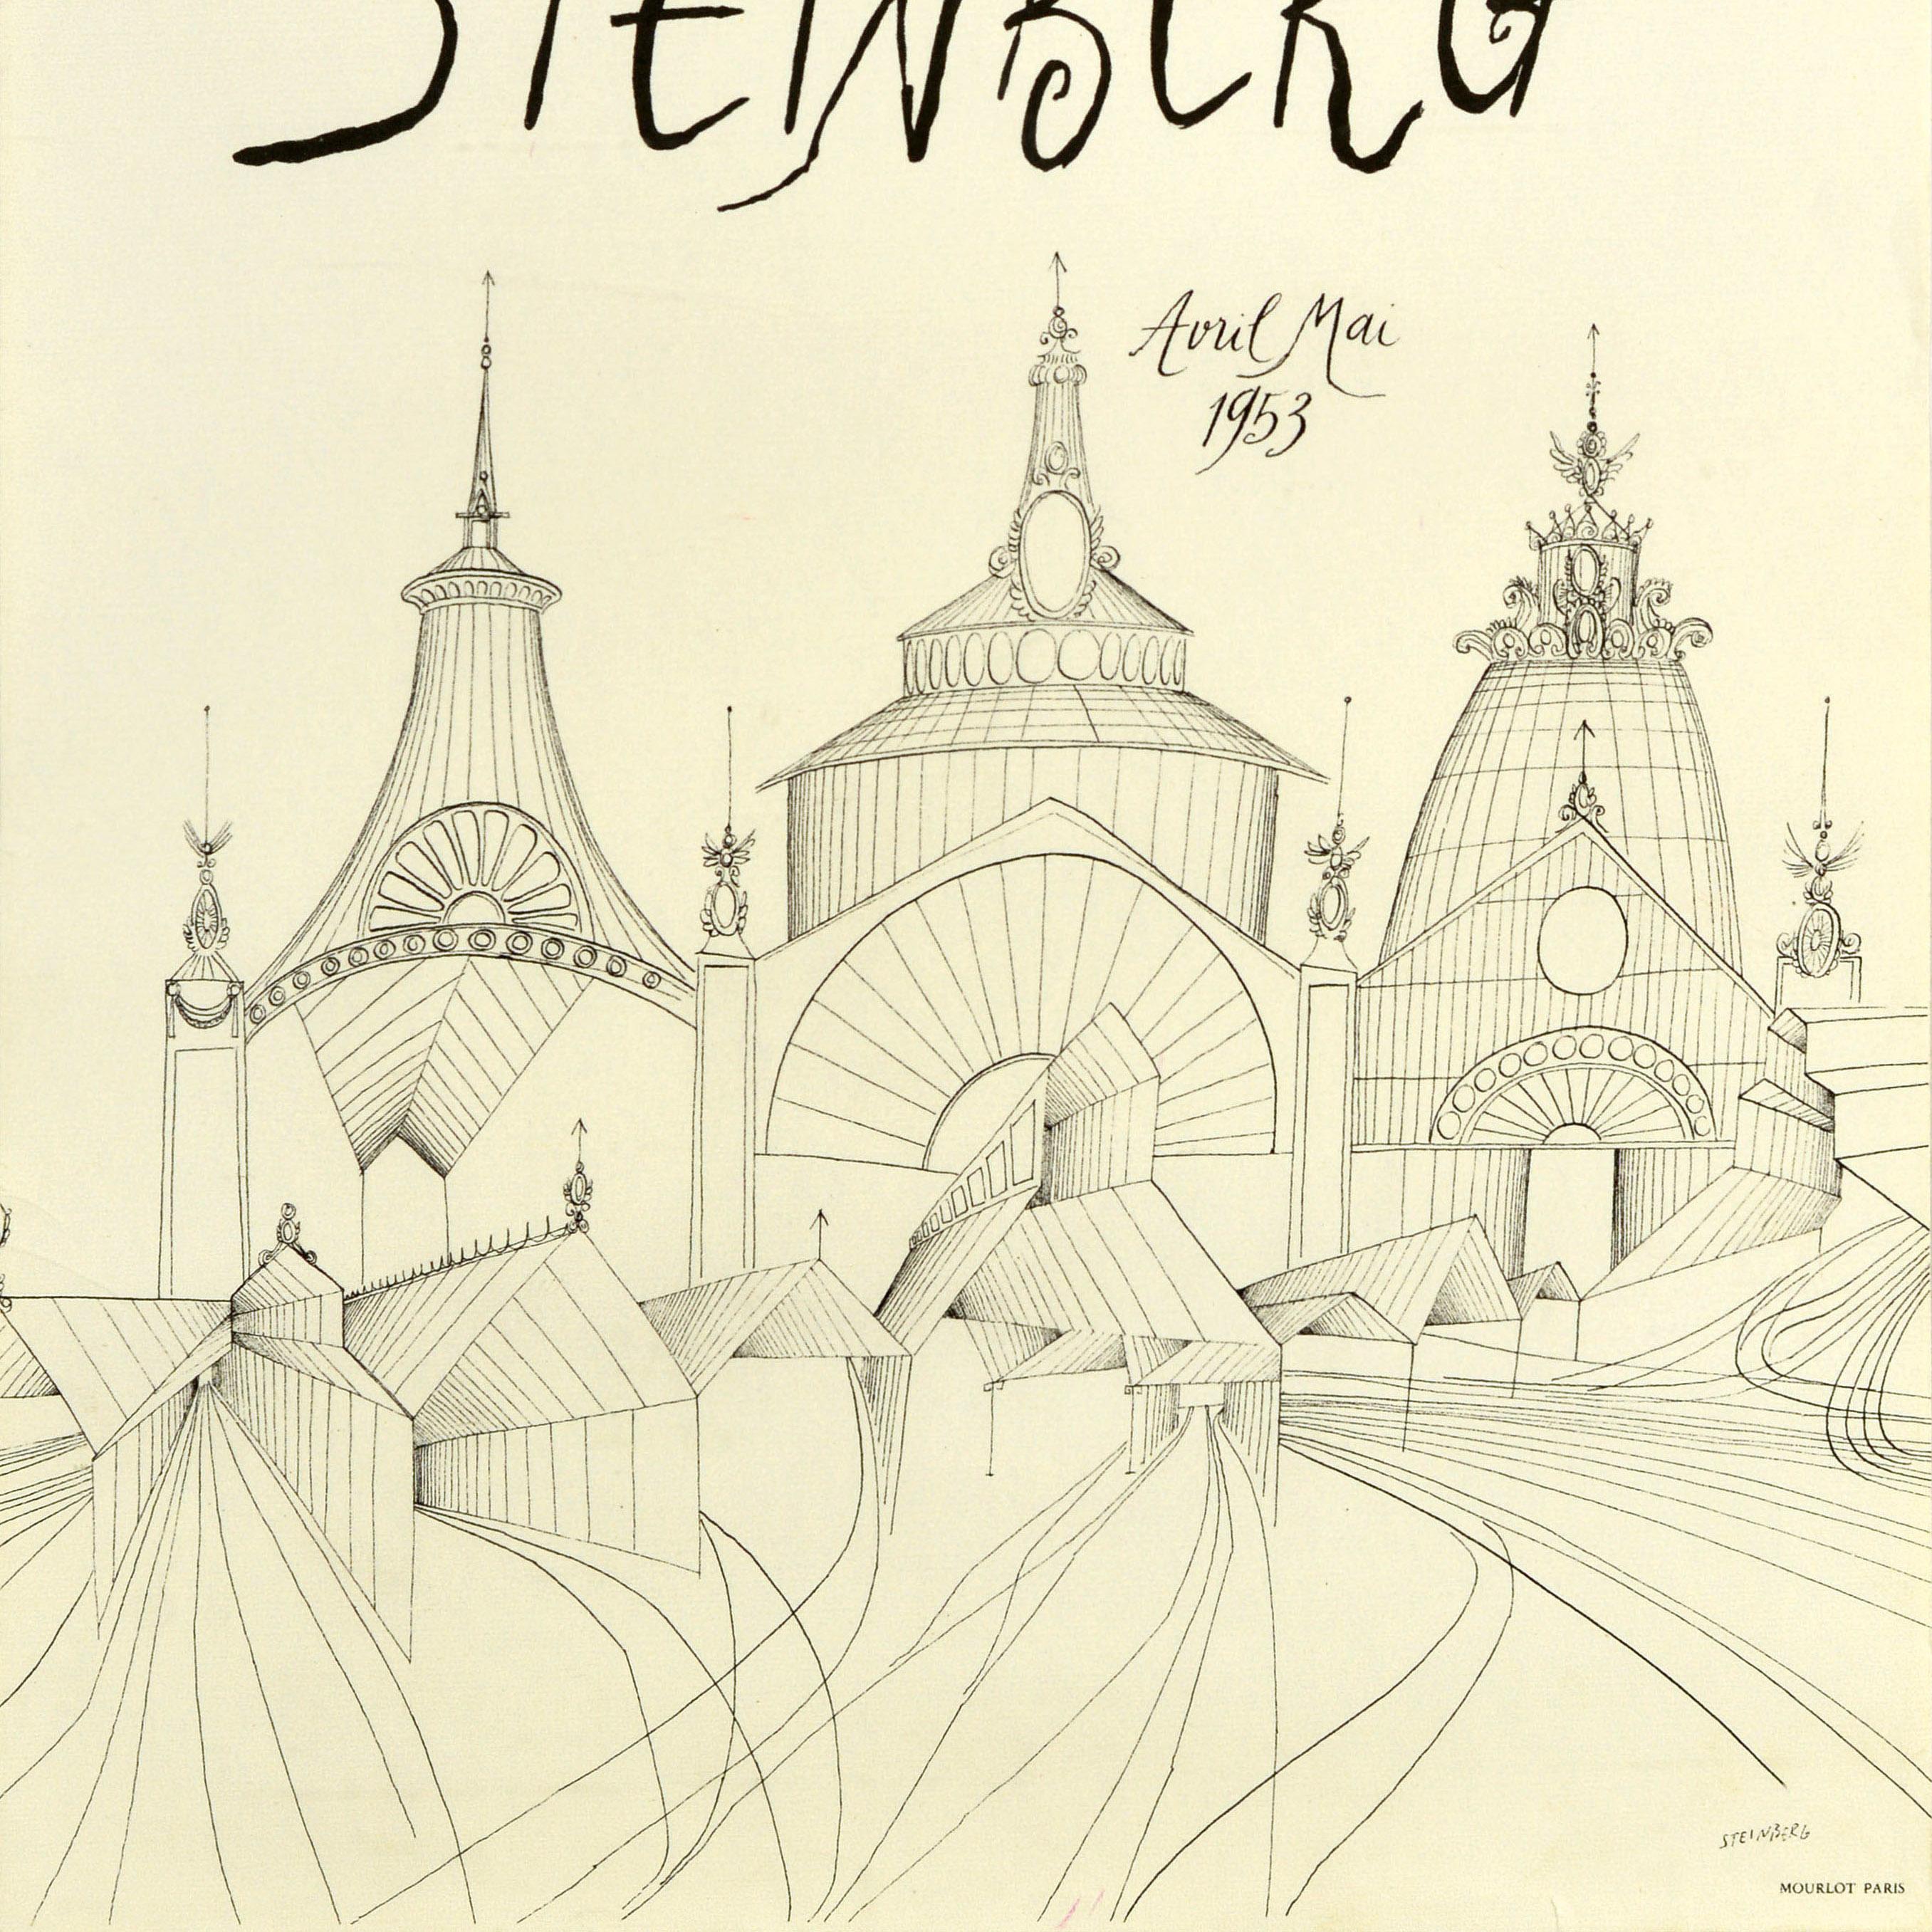 French Original Vintage Art Exhibition Poster Saul Steinberg Dessins Recent Drawings For Sale